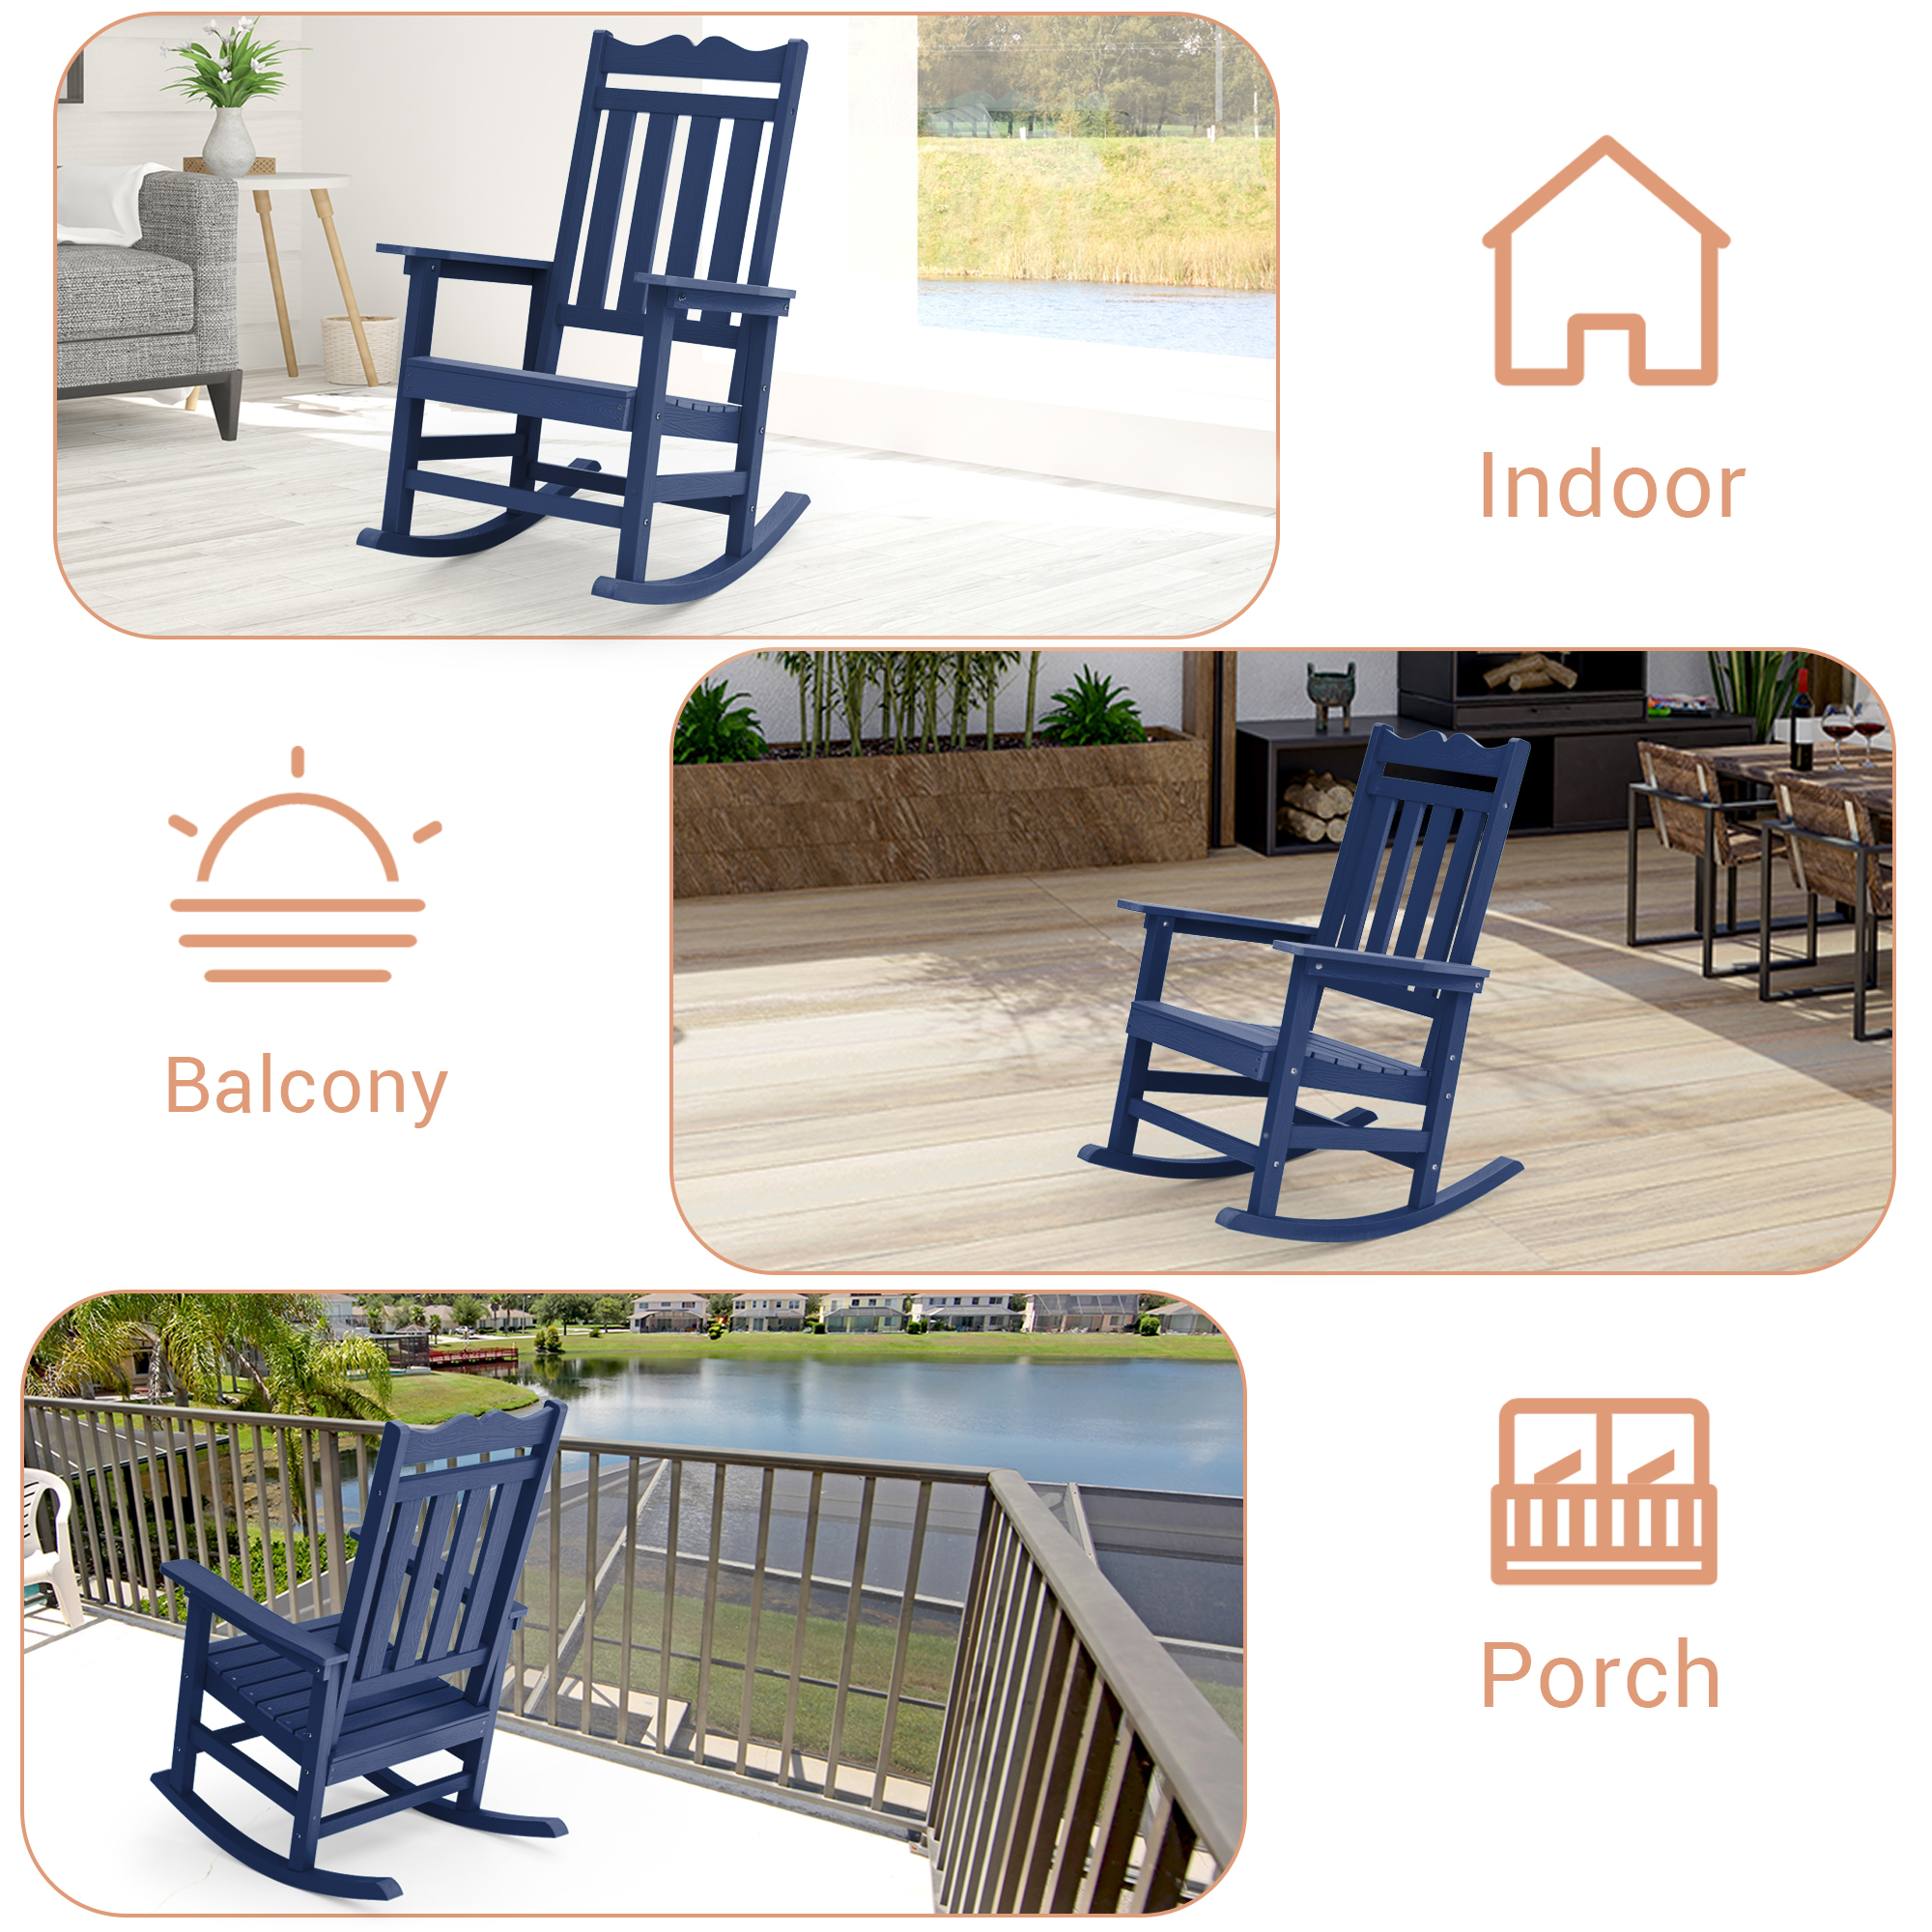 CHYVARY 1 Peaks Patio Adirondack Chair Plastic Single Chairs, Rocking Chair Fire Pit Outdoor Lounge Chair for Lawn and Garden,Navy Blue - image 4 of 8